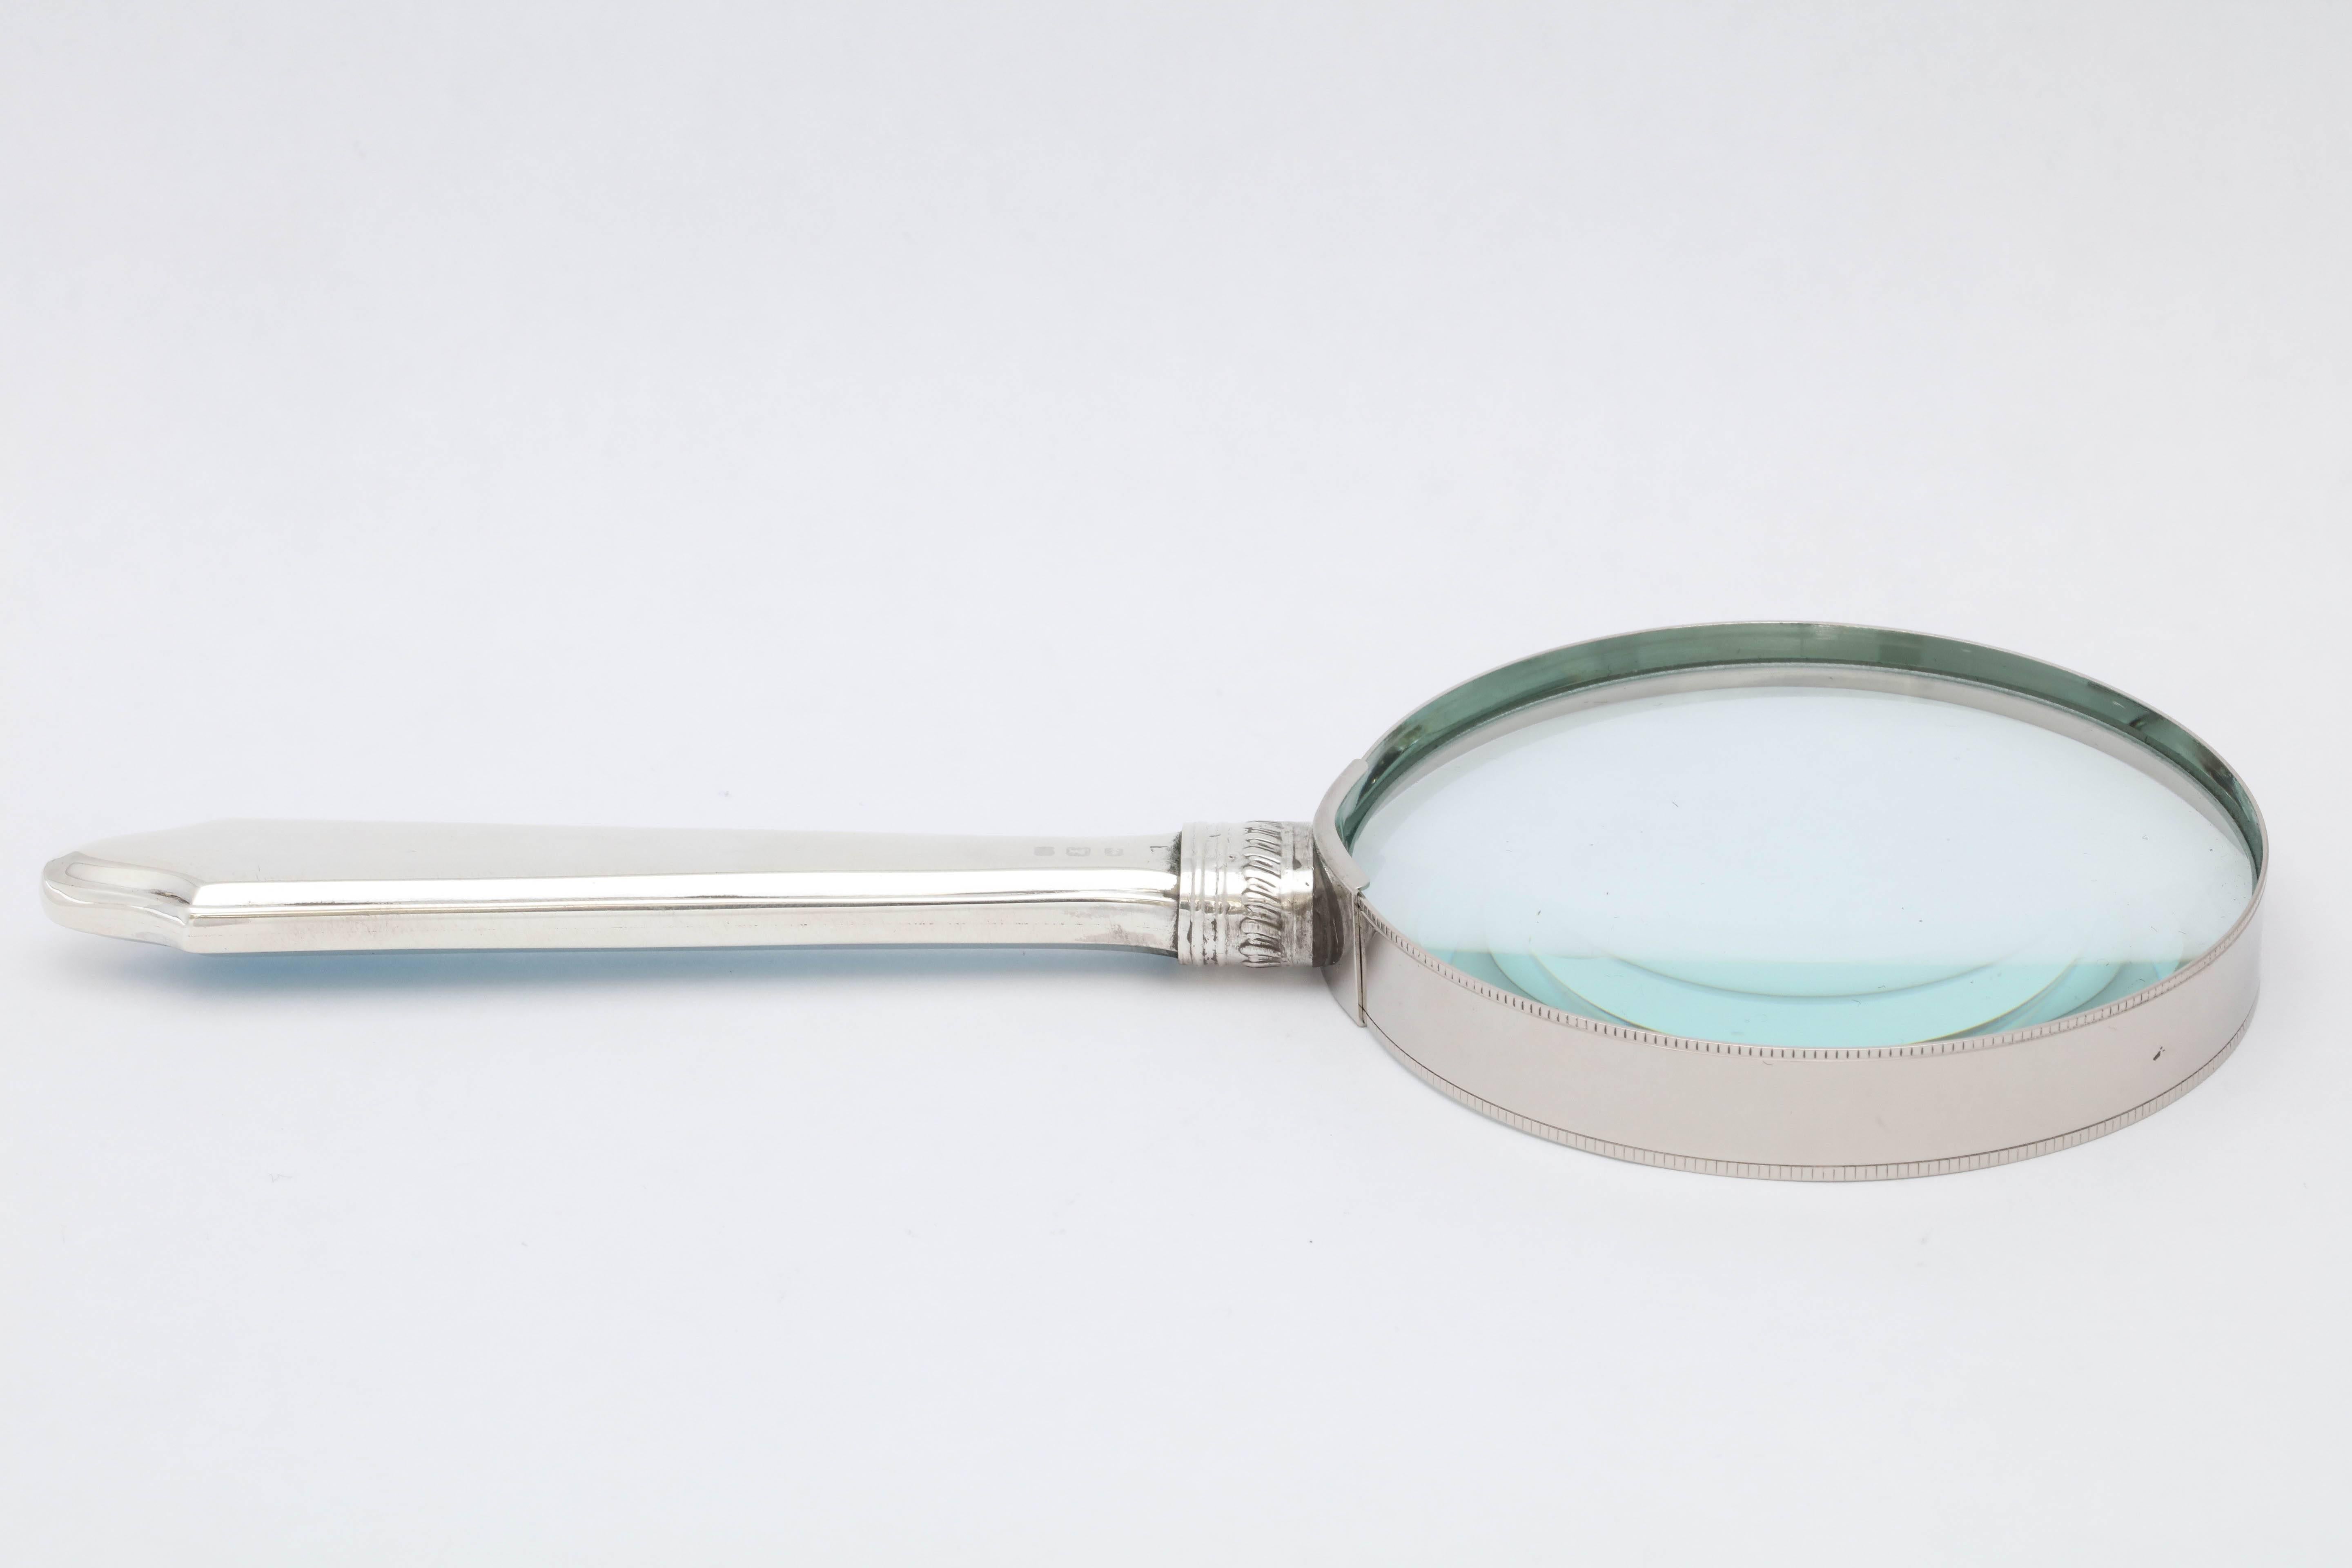 Edwardian Sterling Silver and Blue Guilloche Enamel-Mounted Magnifying Glass For Sale 2